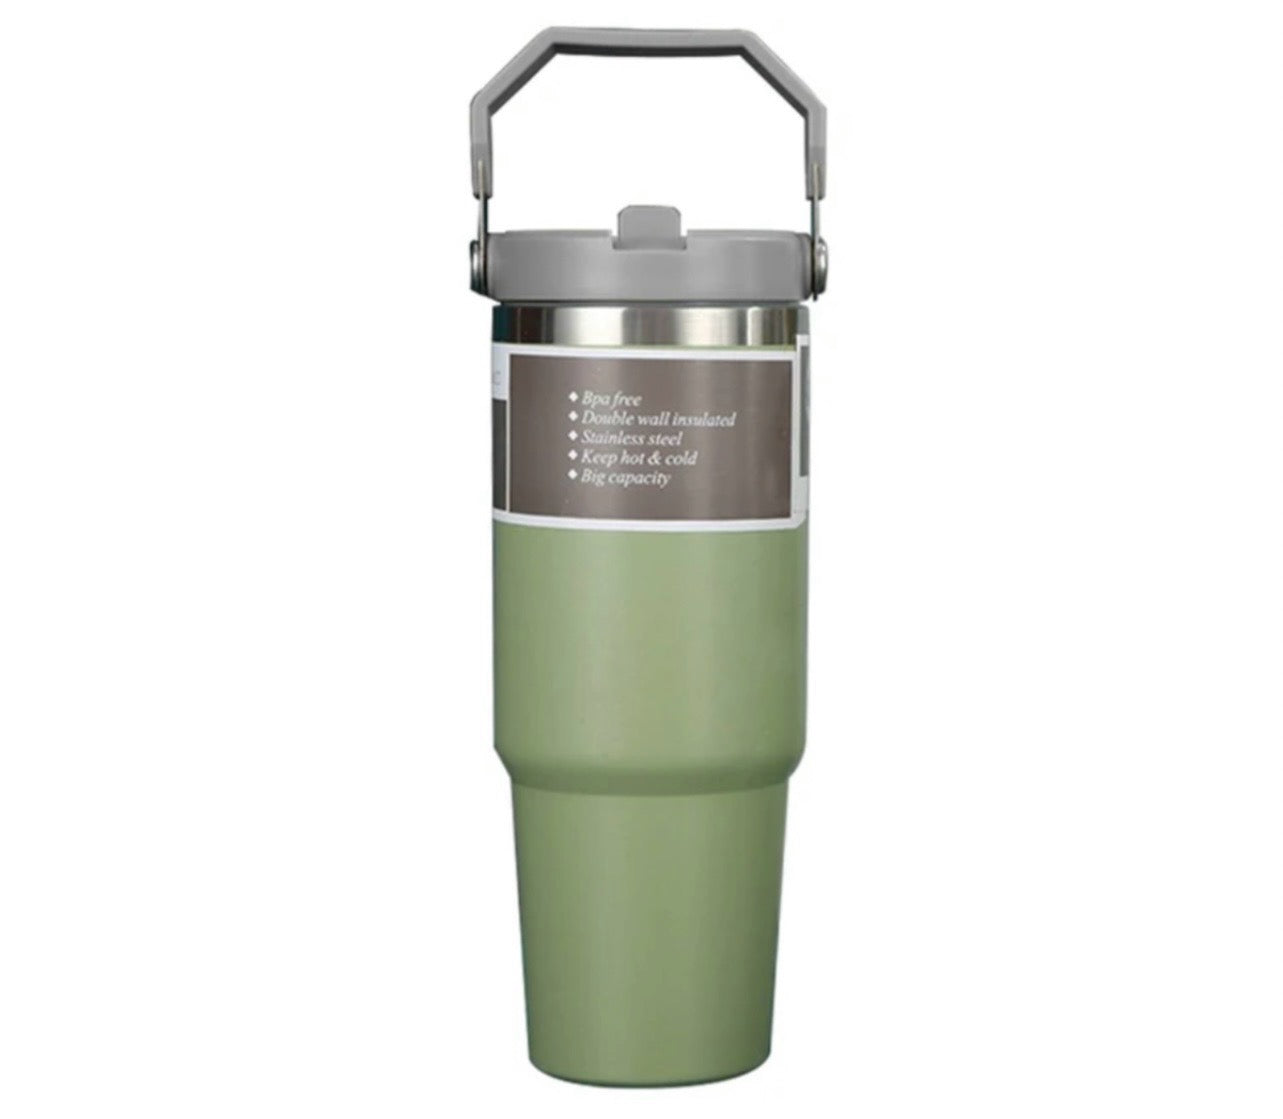 600ml Thermal Insulated Travel Mug with Carry Handle and Straw